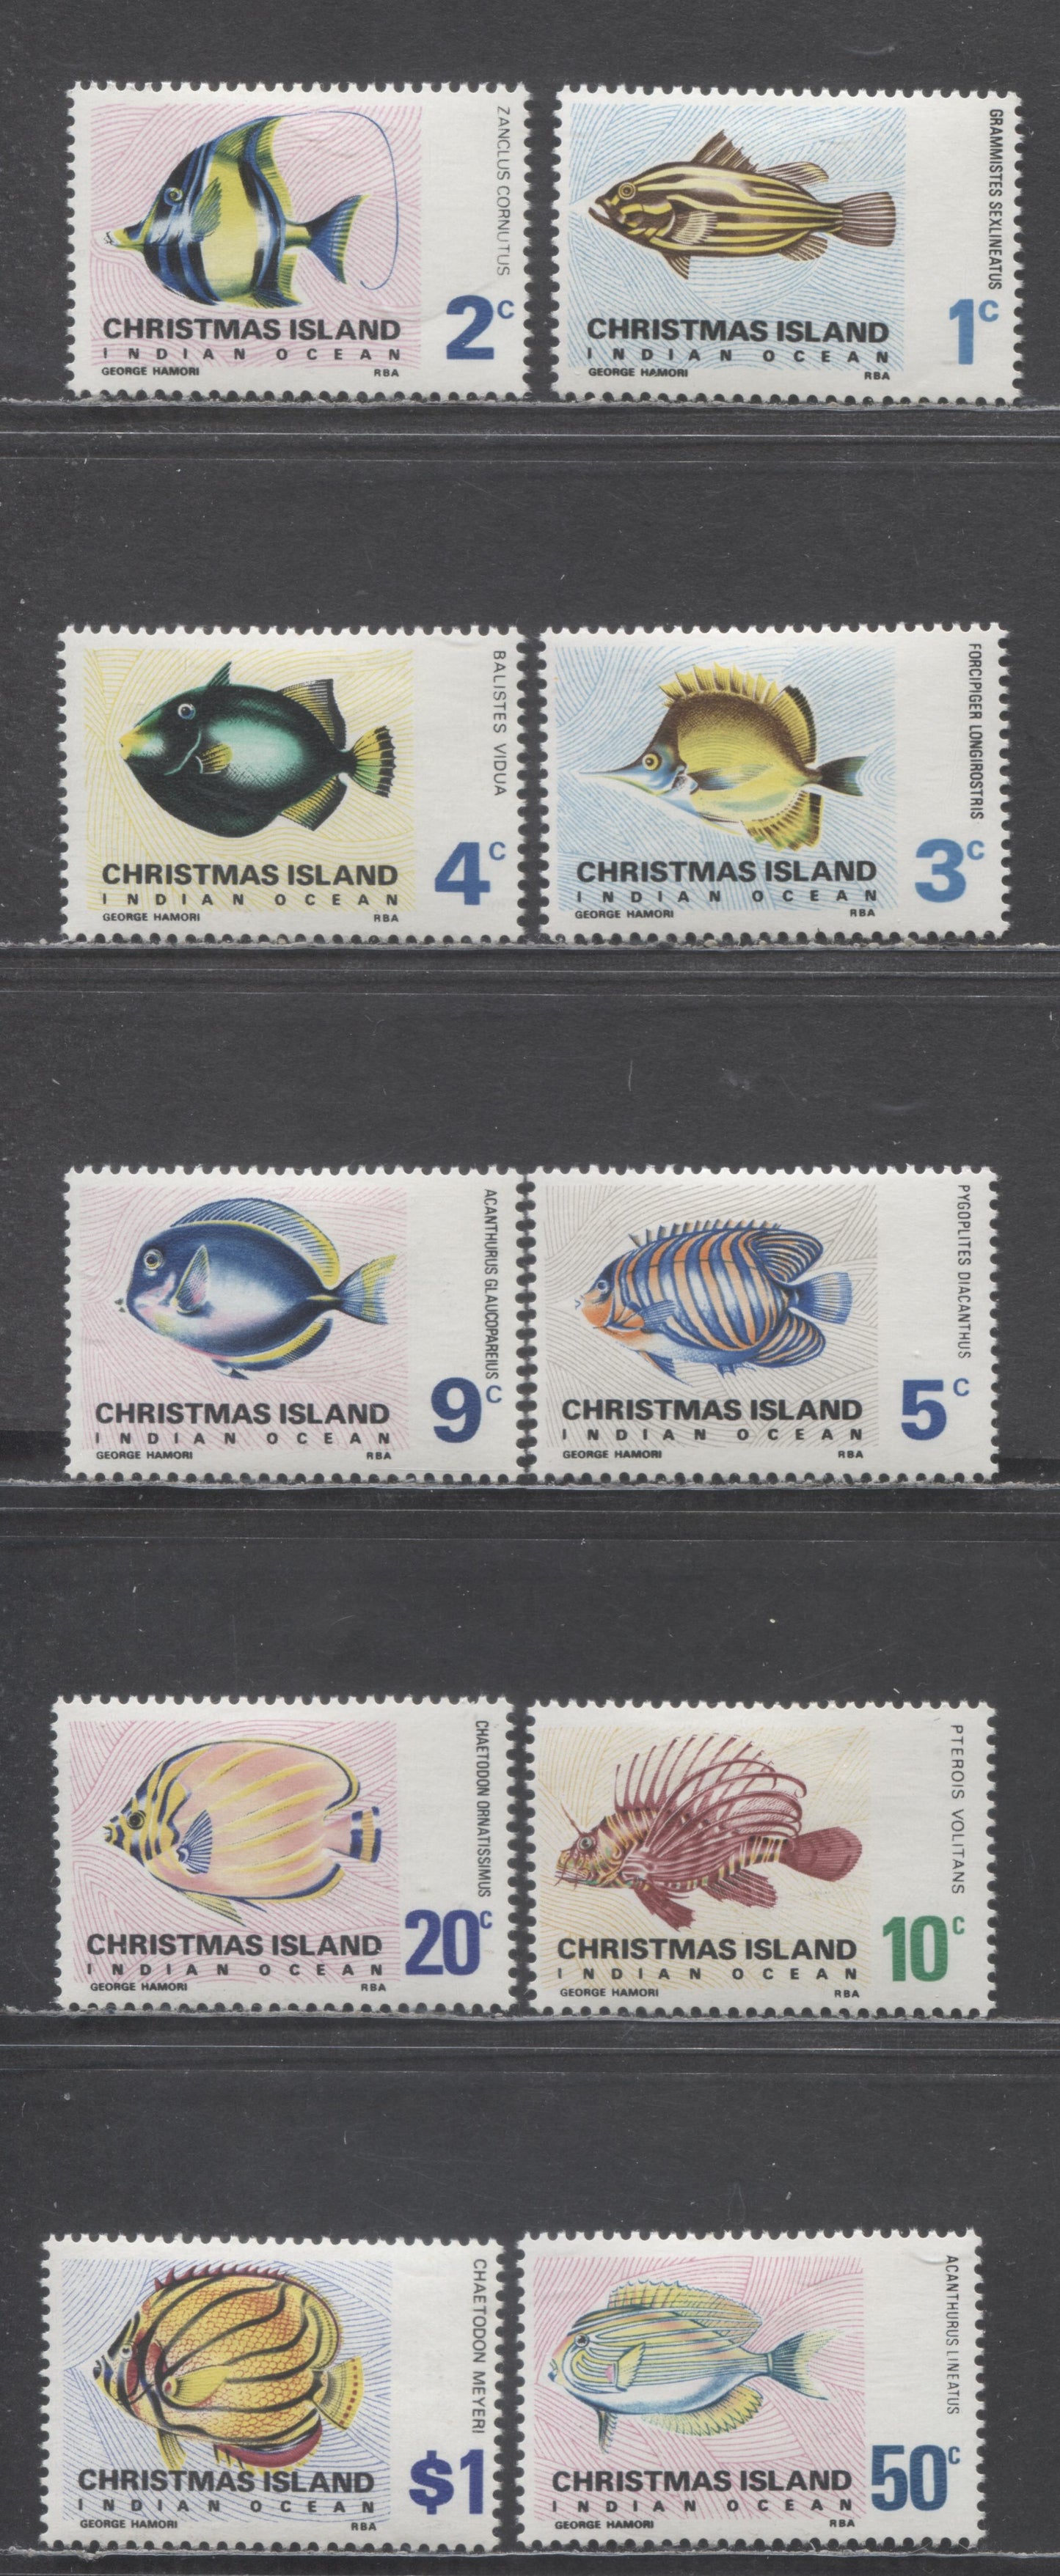 Lot 86 Christmas Islands SC#22-33 1968-1970 Fish Definitives, 10 VFOG Singles, Click on Listing to See ALL Pictures, 2017 Scott Cat. $20